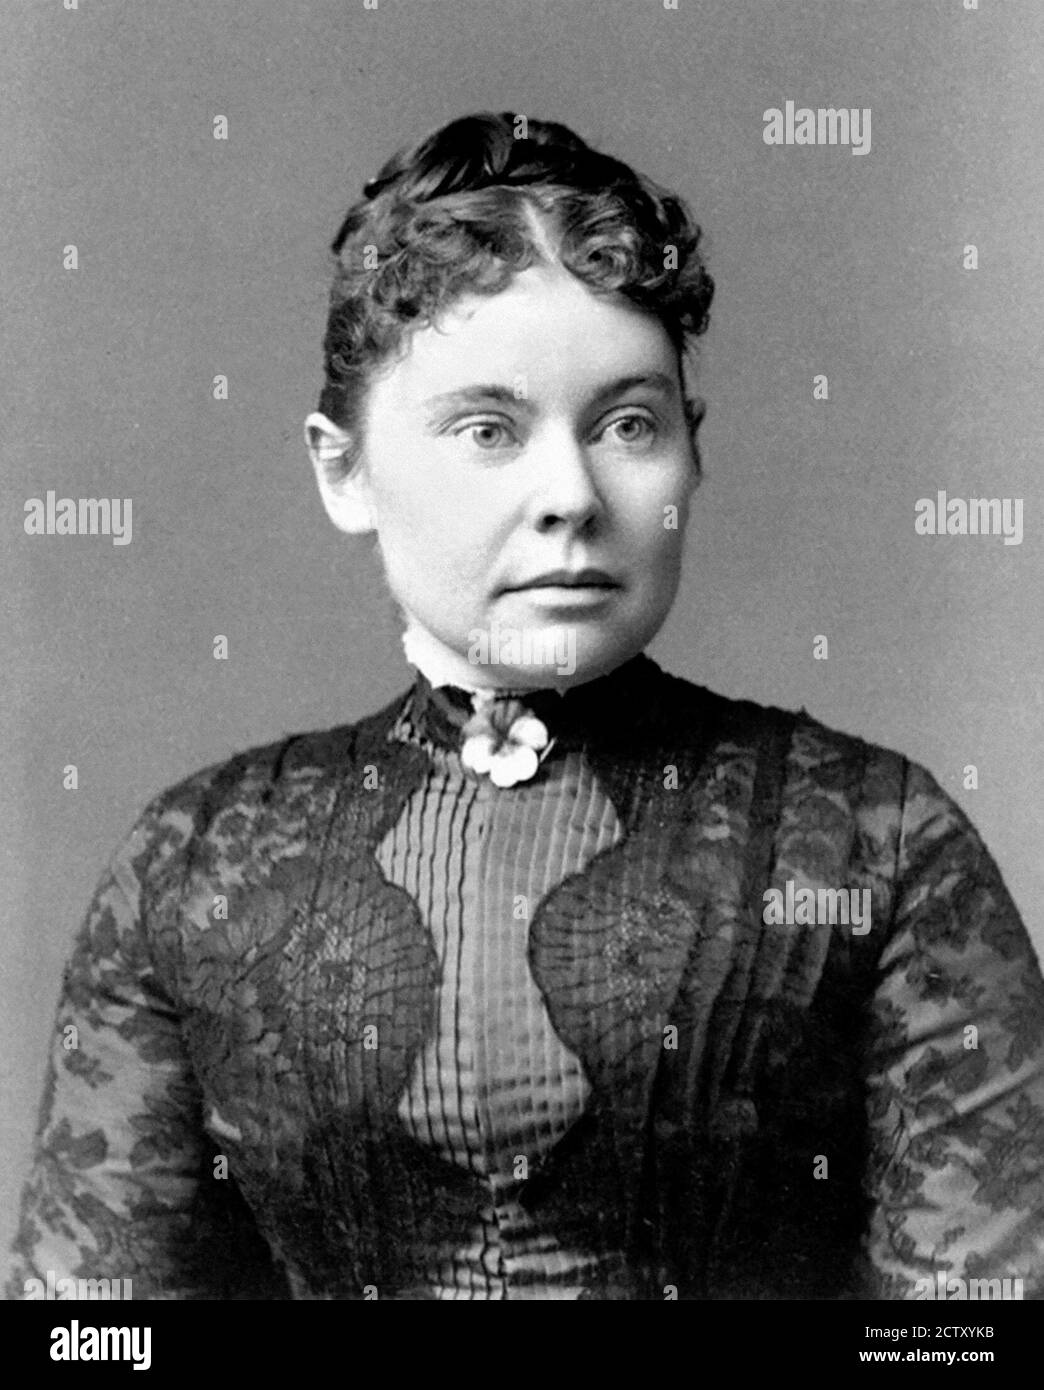 Lizzie Borden. Portrait of of Lizzie Andrew Borden (1860-1927), c.1890. Borden was accused and acquitted of the axe murder of her father and stepmother. Stock Photo